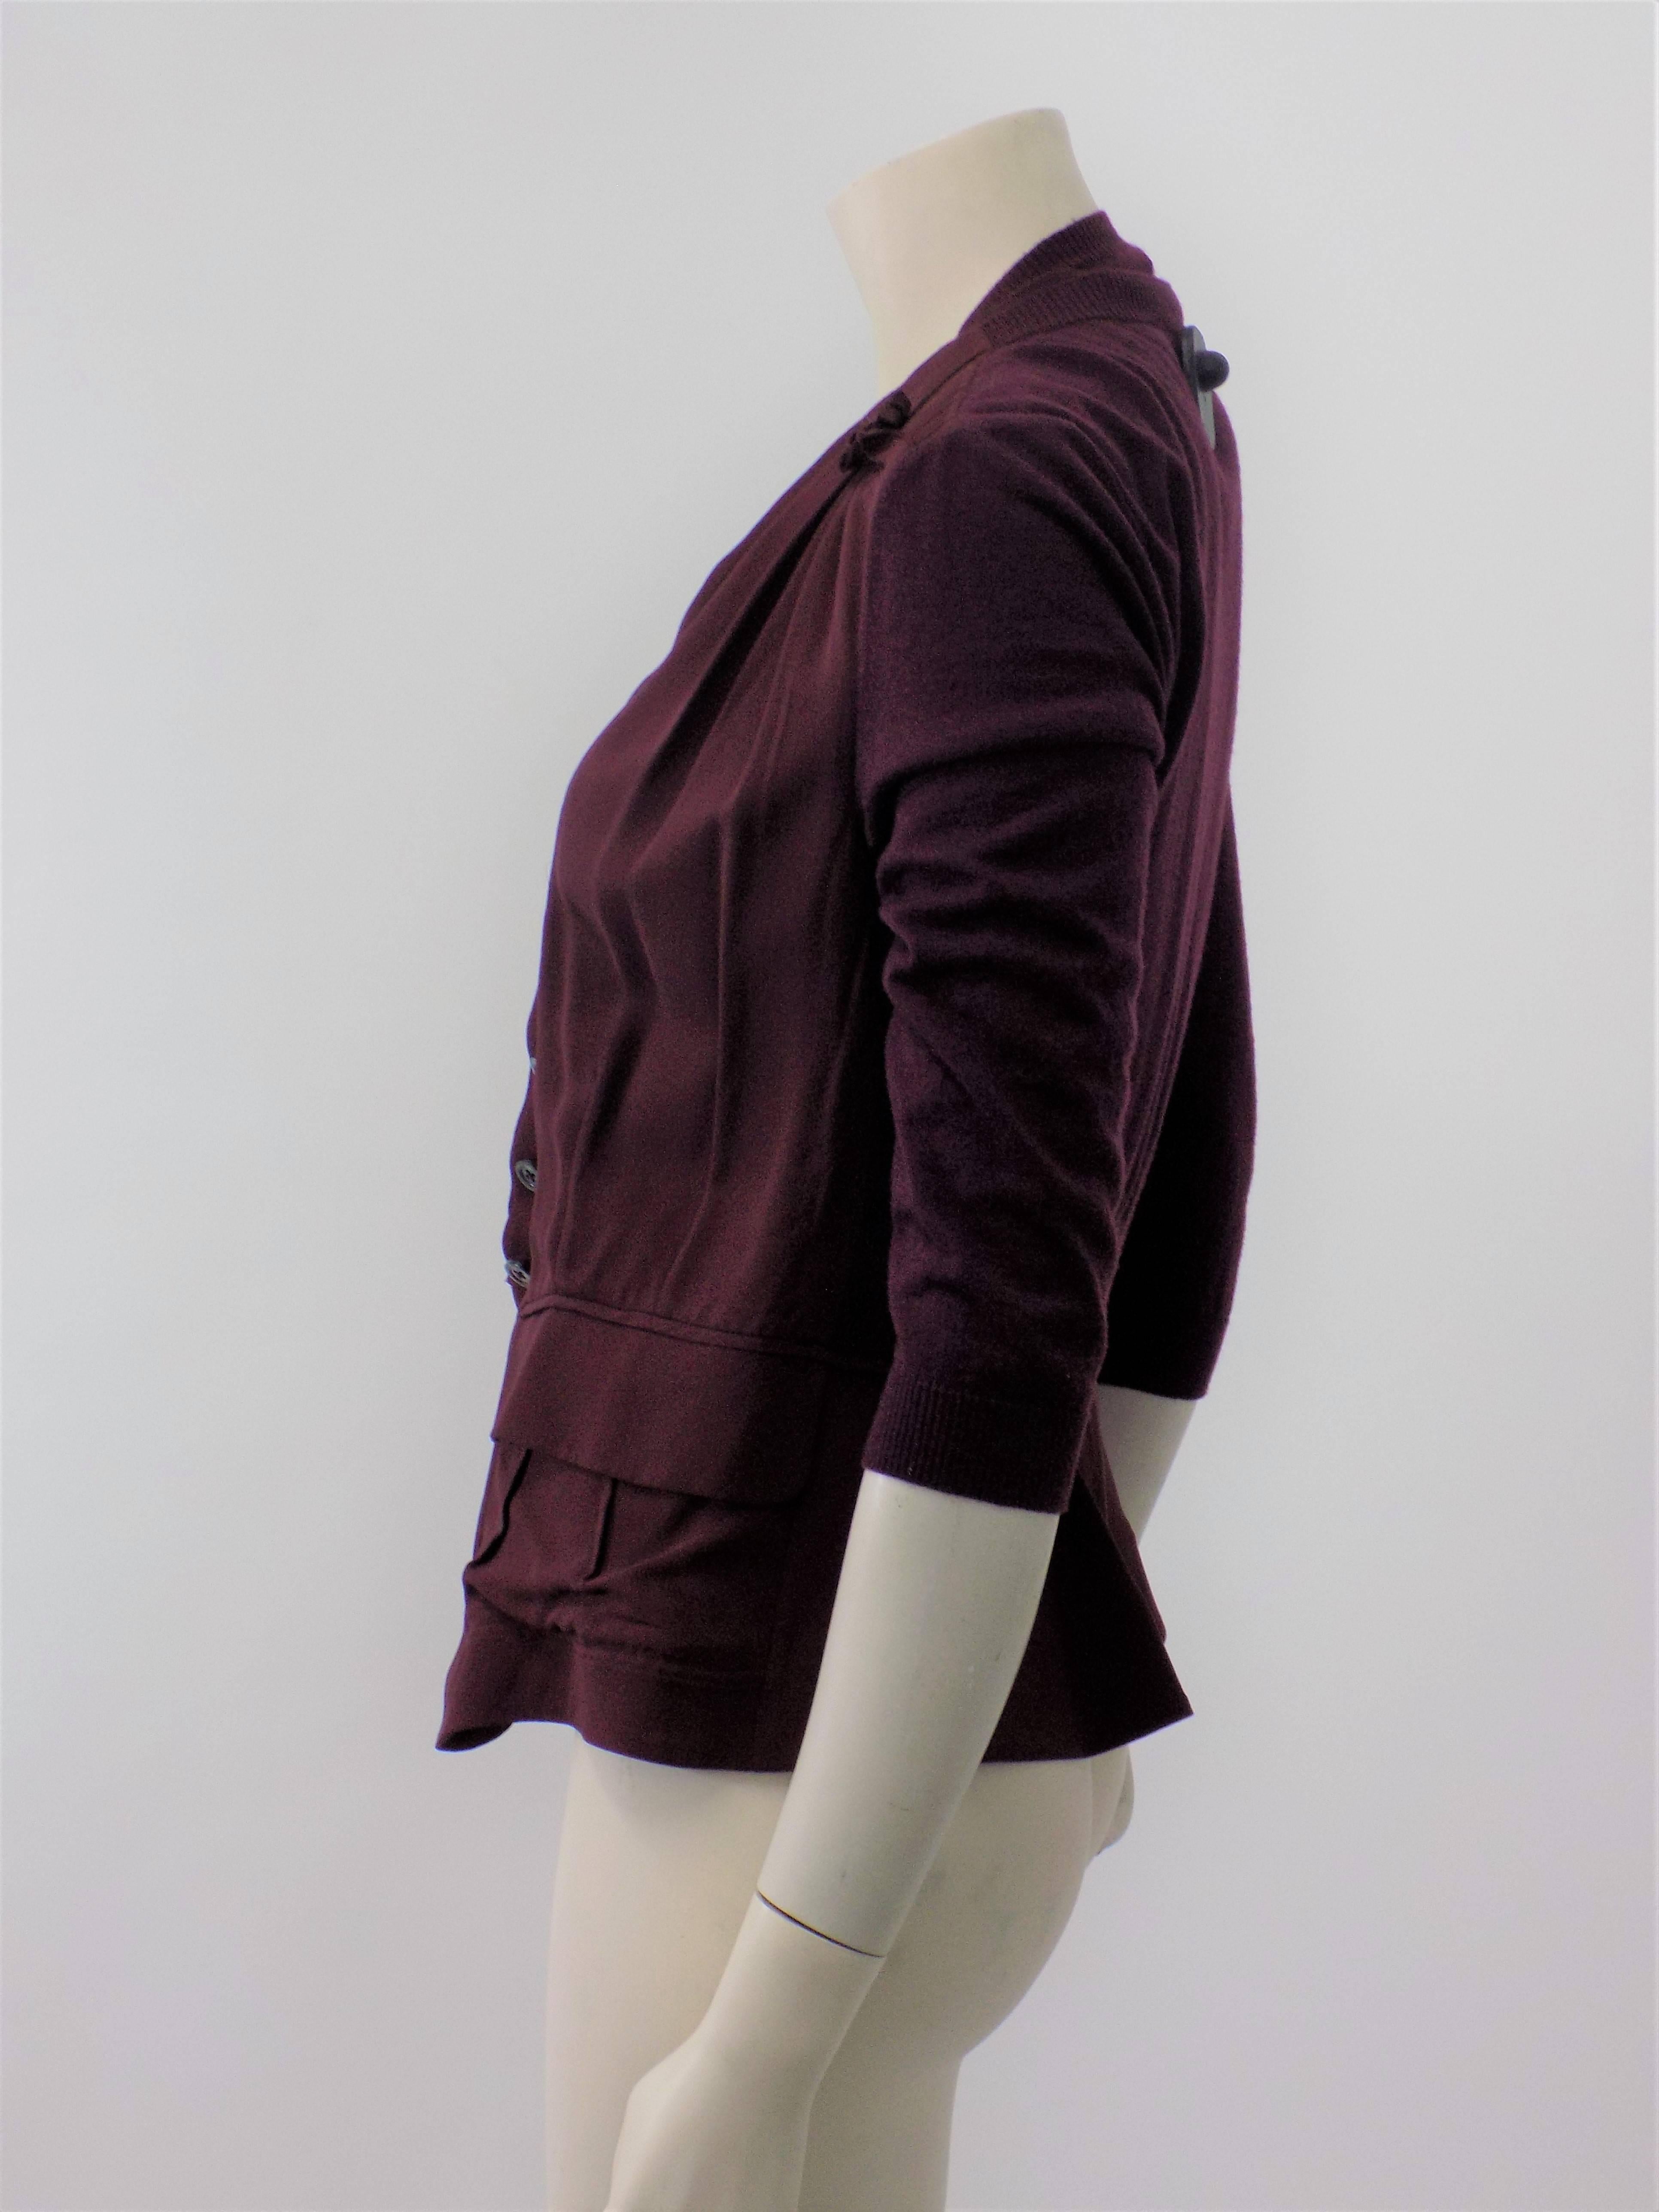 Never worn vintage Nina Ricci maroon cashmere and silk blend sleevless top with cardigan/ jacket . Combination of cashmere knit and sik featuring concieled front closure , two pockets  and long sleeves. Fabulous piece.. Size 40.  Bust 36